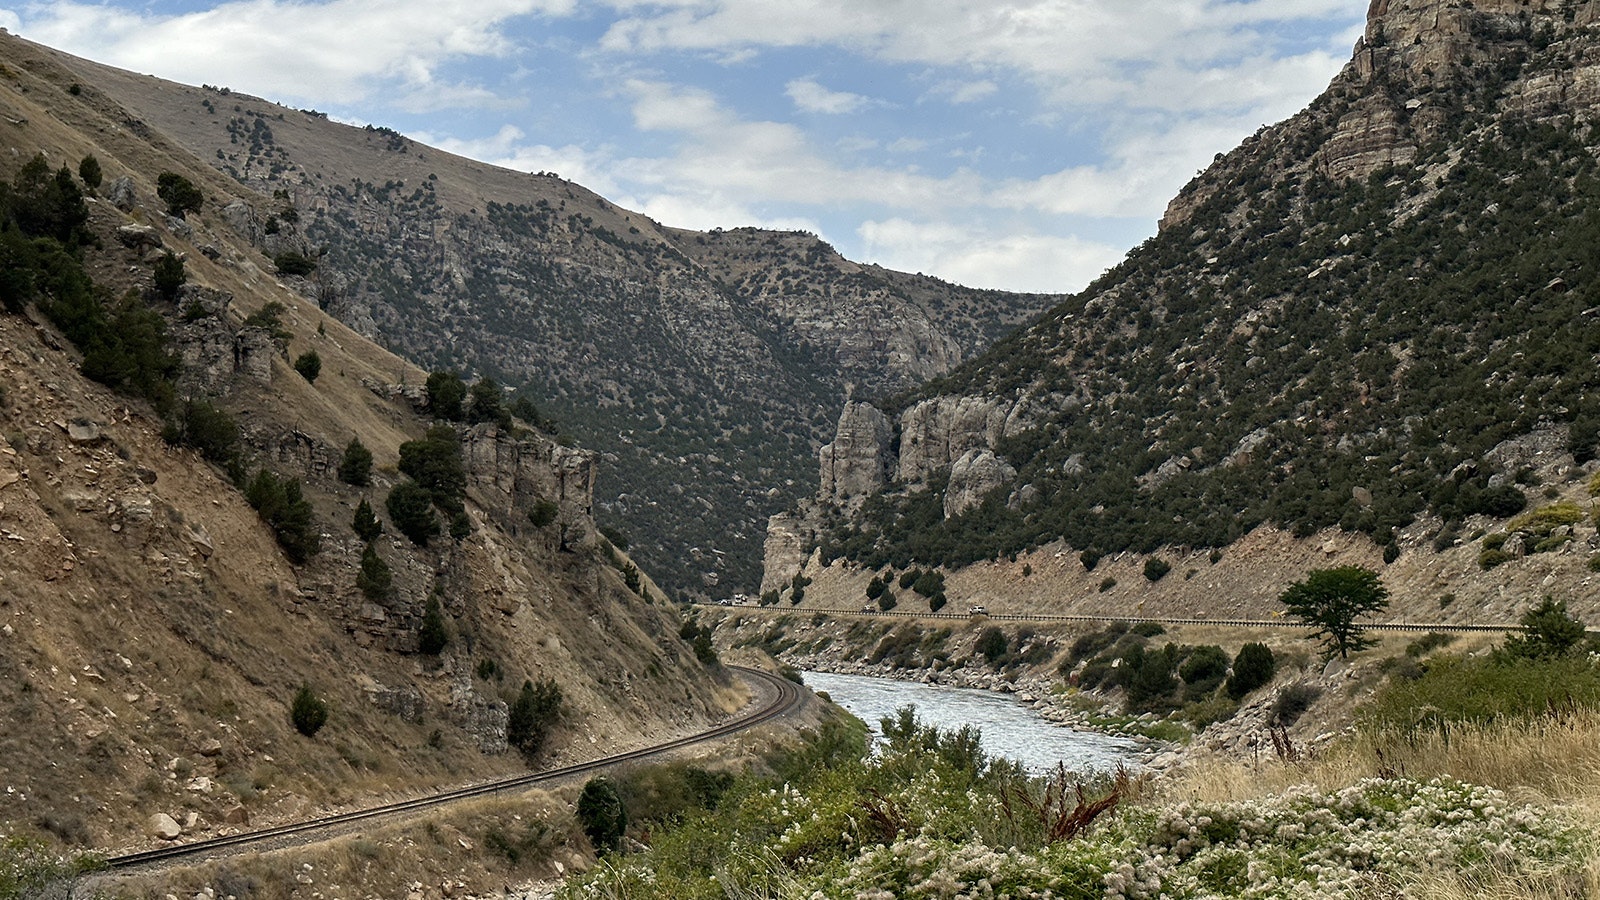 A view of the Wind River Canyon from one of the pullouts on U.S. Highway 20.